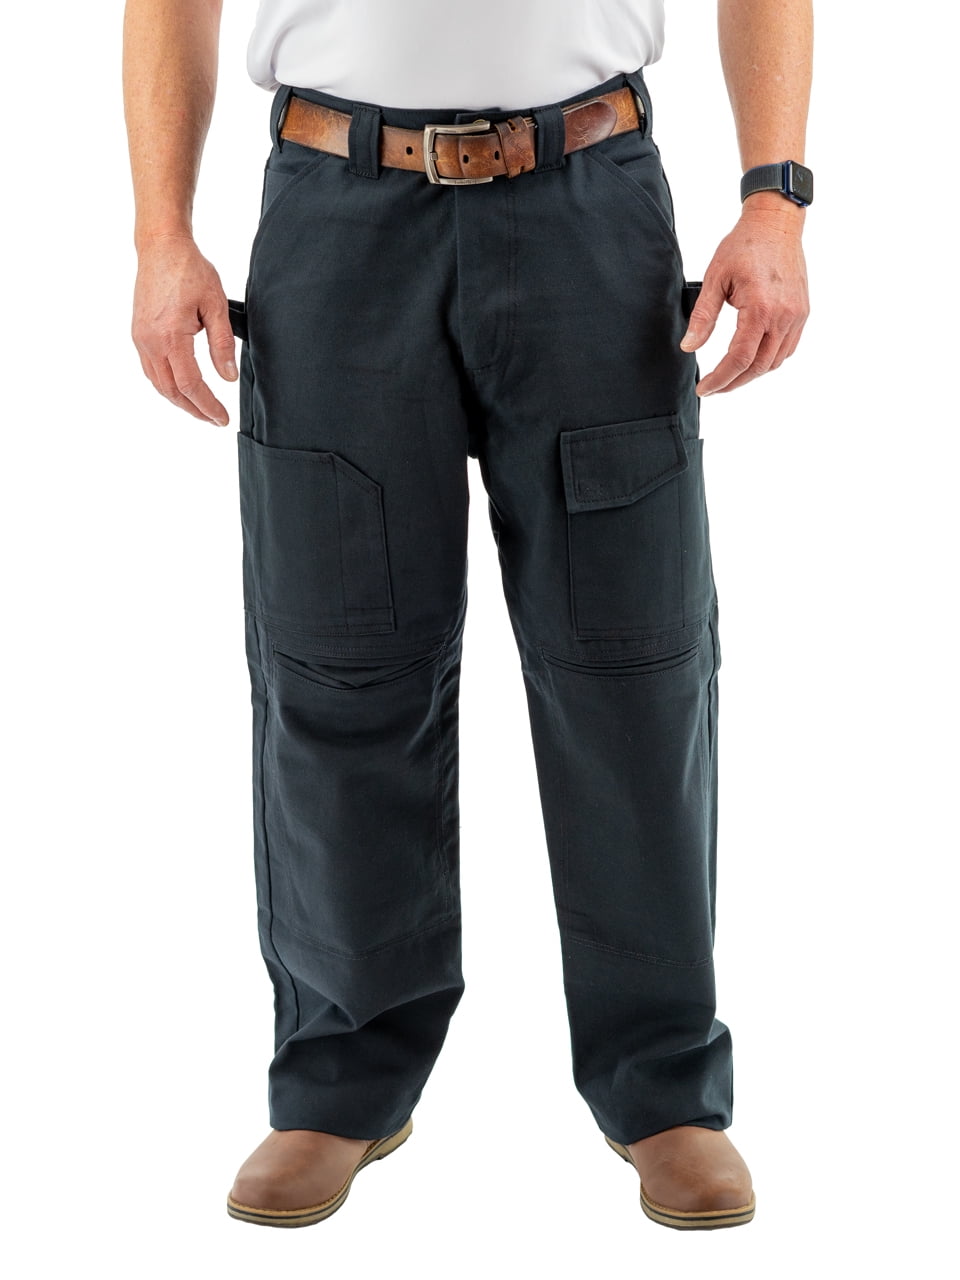 JOBMAN Workwear Flooring Installer Pants with Stretch - 2358 designed  especially for the flooring installer profession